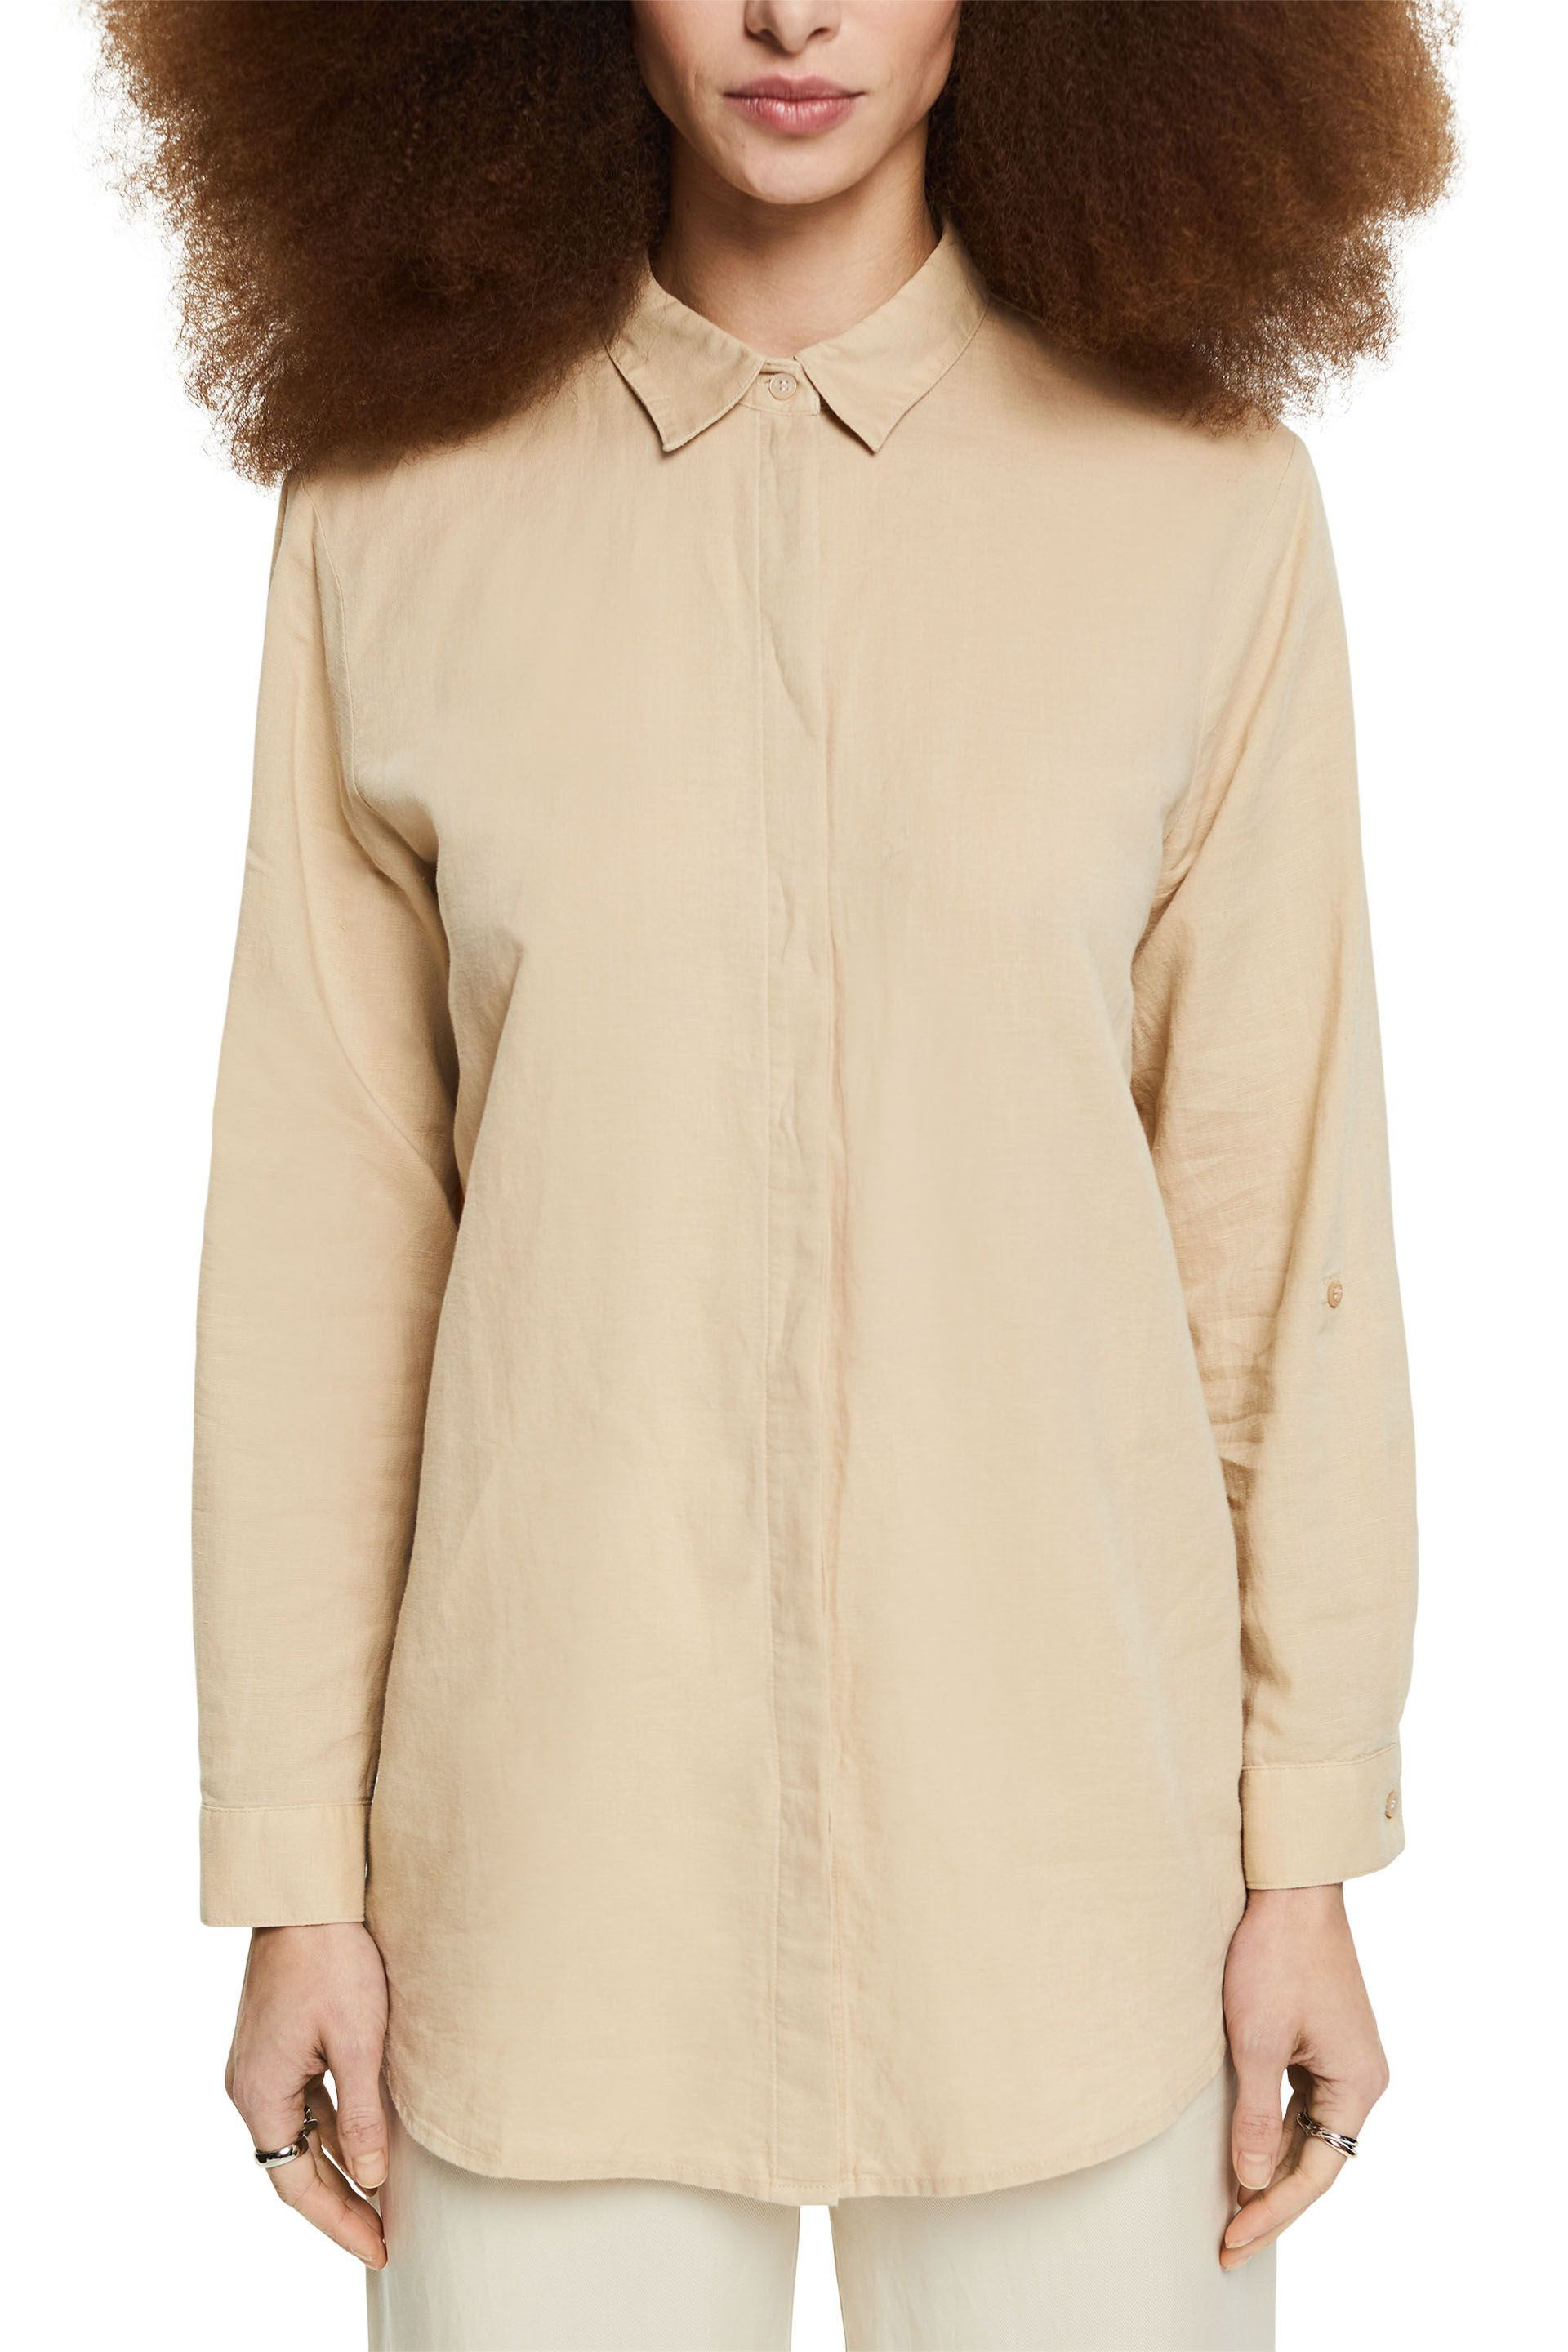 Camicia in misto lino, Beige, large image number 1